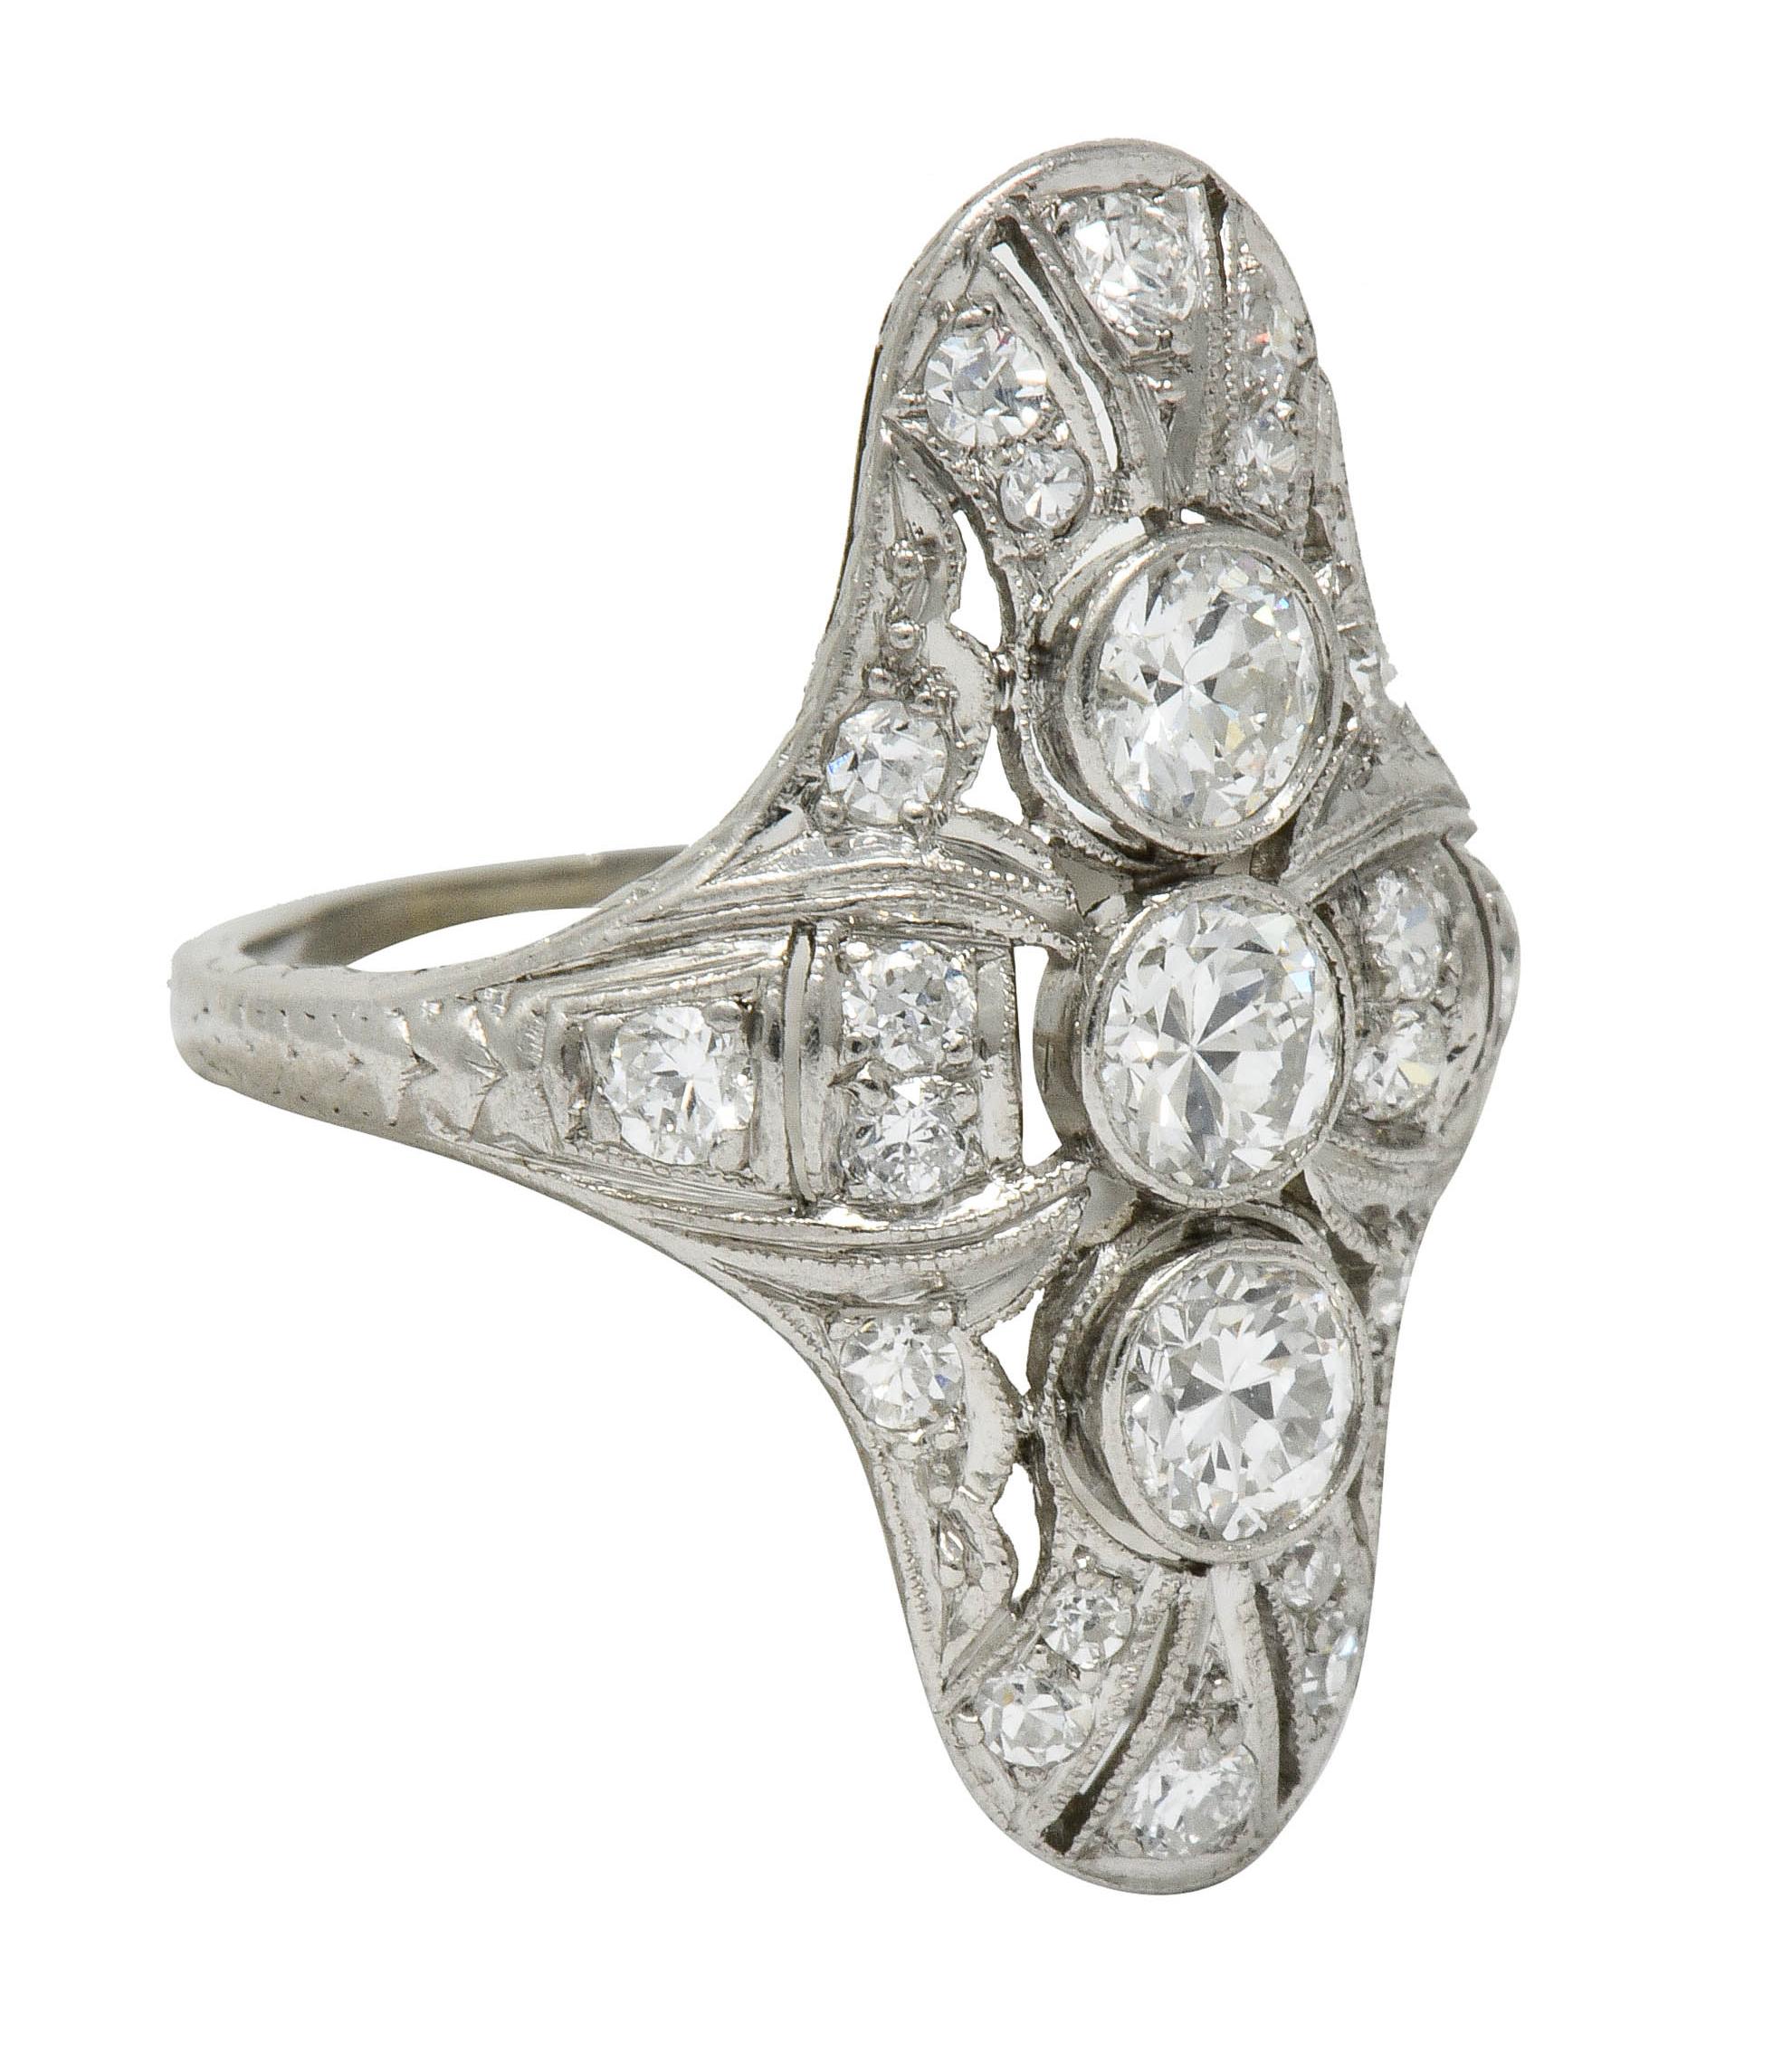 Dinner style ring centering three transitional cut diamonds weighing in total approximately 0.75 carat; H/I color and VS clarity

Bezel set North to South in a pierced milgrain mounting with engraved foliate shoulders

Accented throughout by round